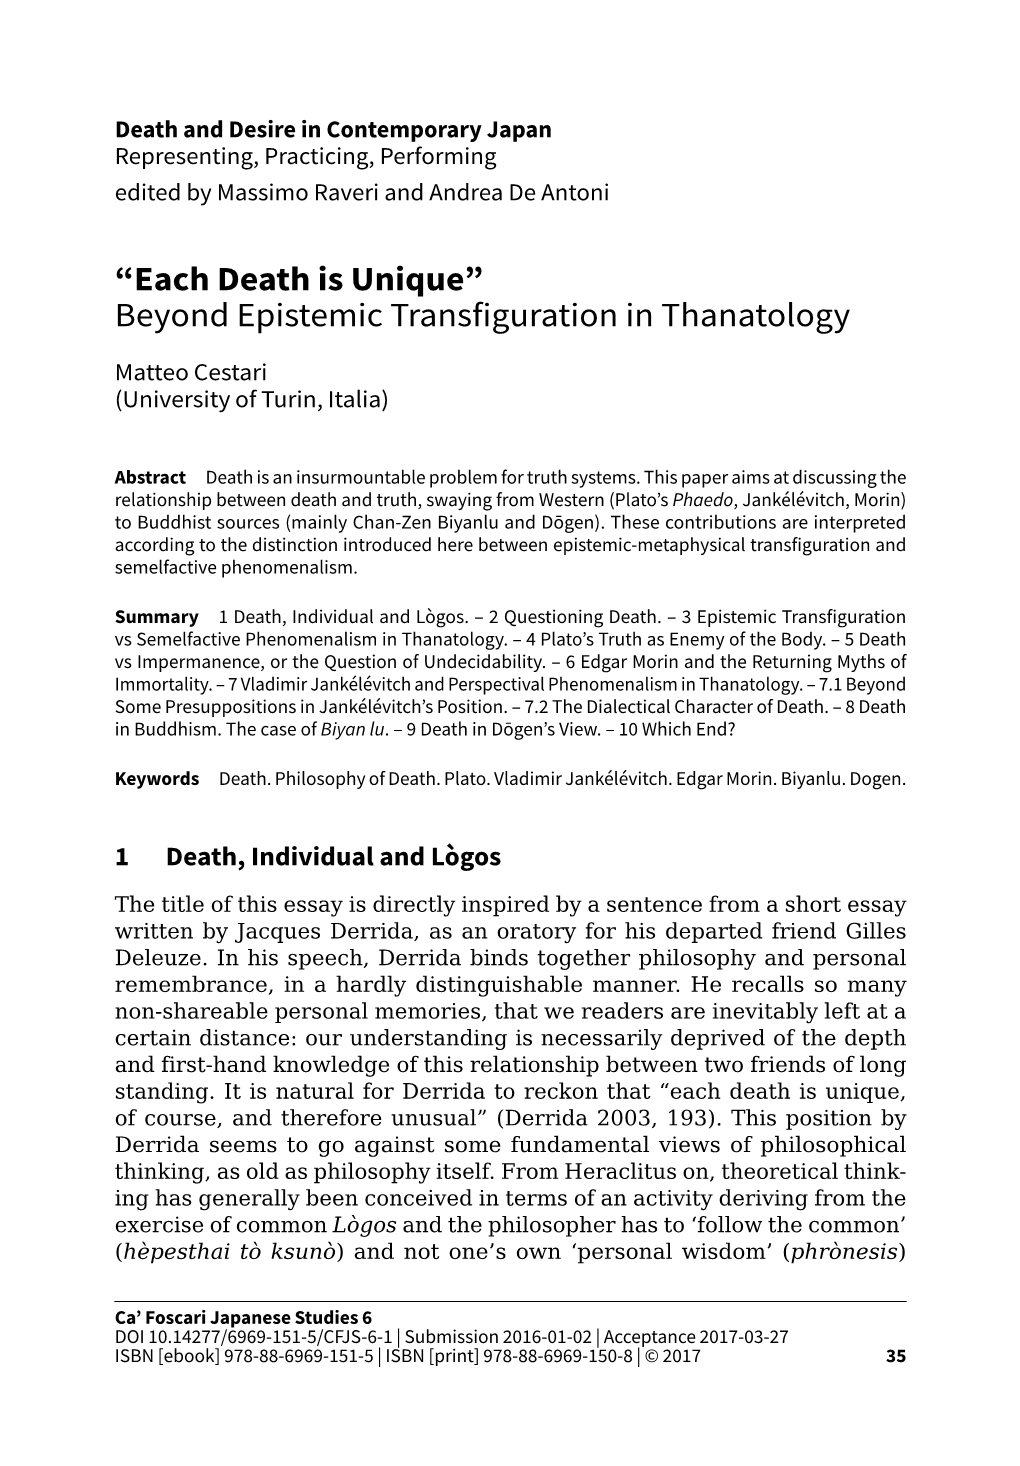 “Each Death Is Unique” Beyond Epistemic Transfiguration in Thanatology